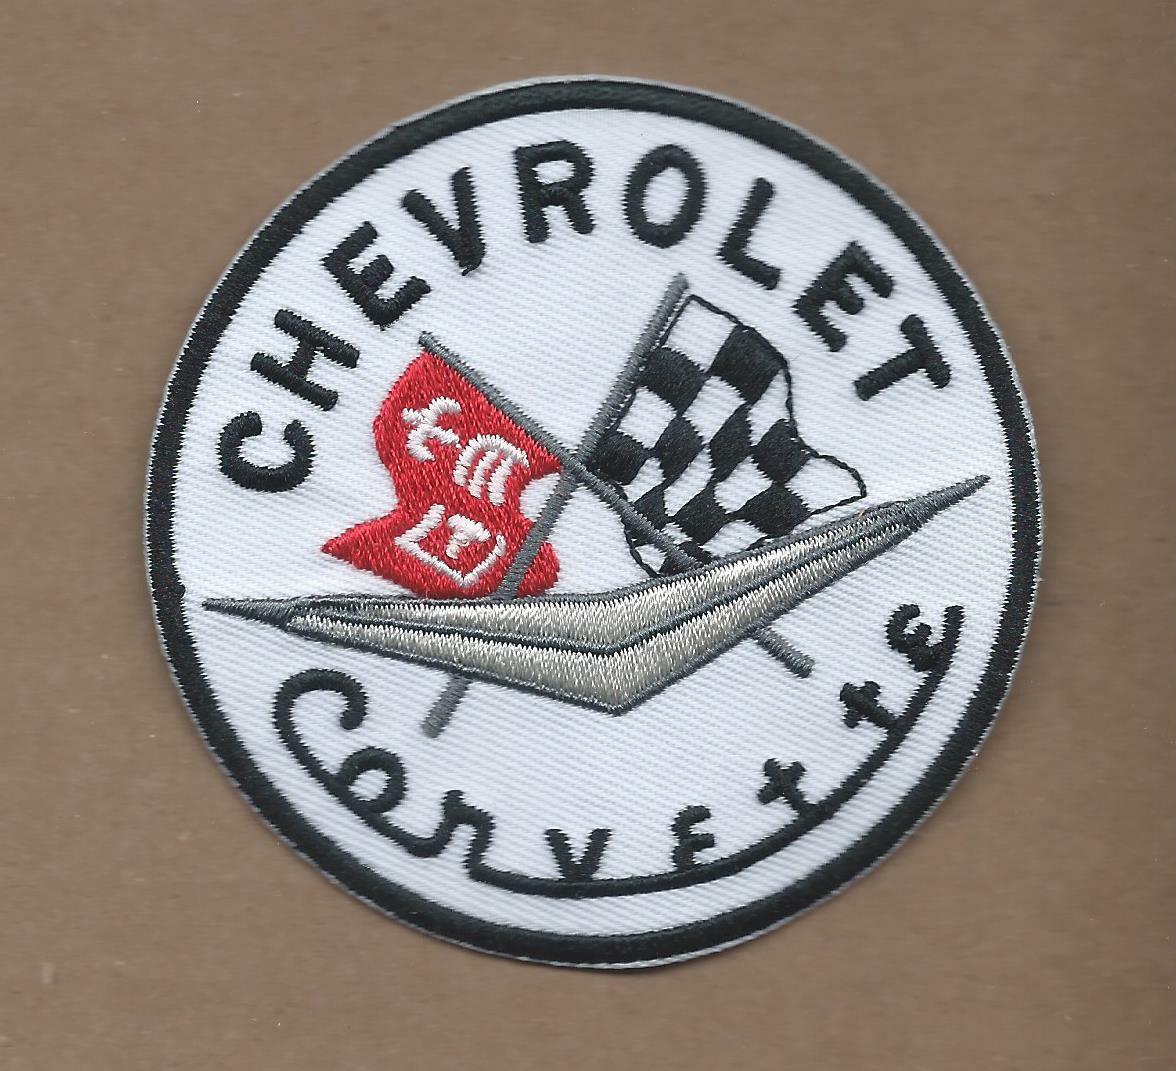 NEW 3 INCH WHITE CHEVROLET CORVETTE IRON ON PATCH  P1